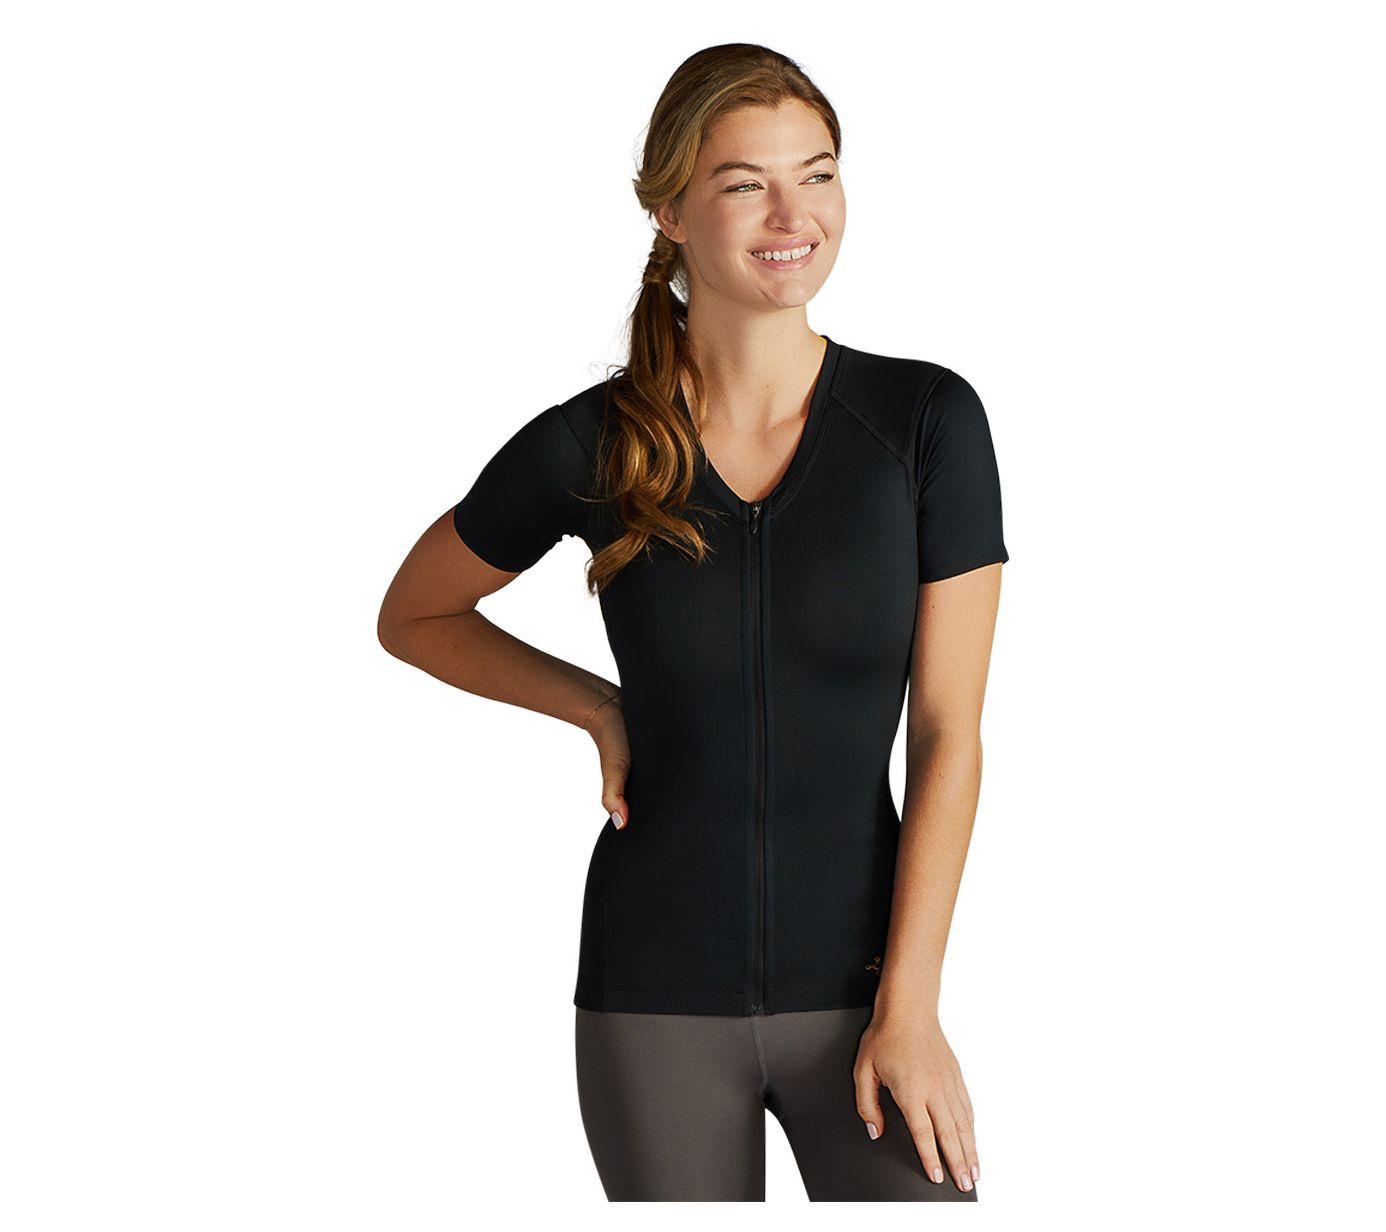 Tommie Copper Womens Full Zip Compression Shirt w/ Back Support - QVC.com